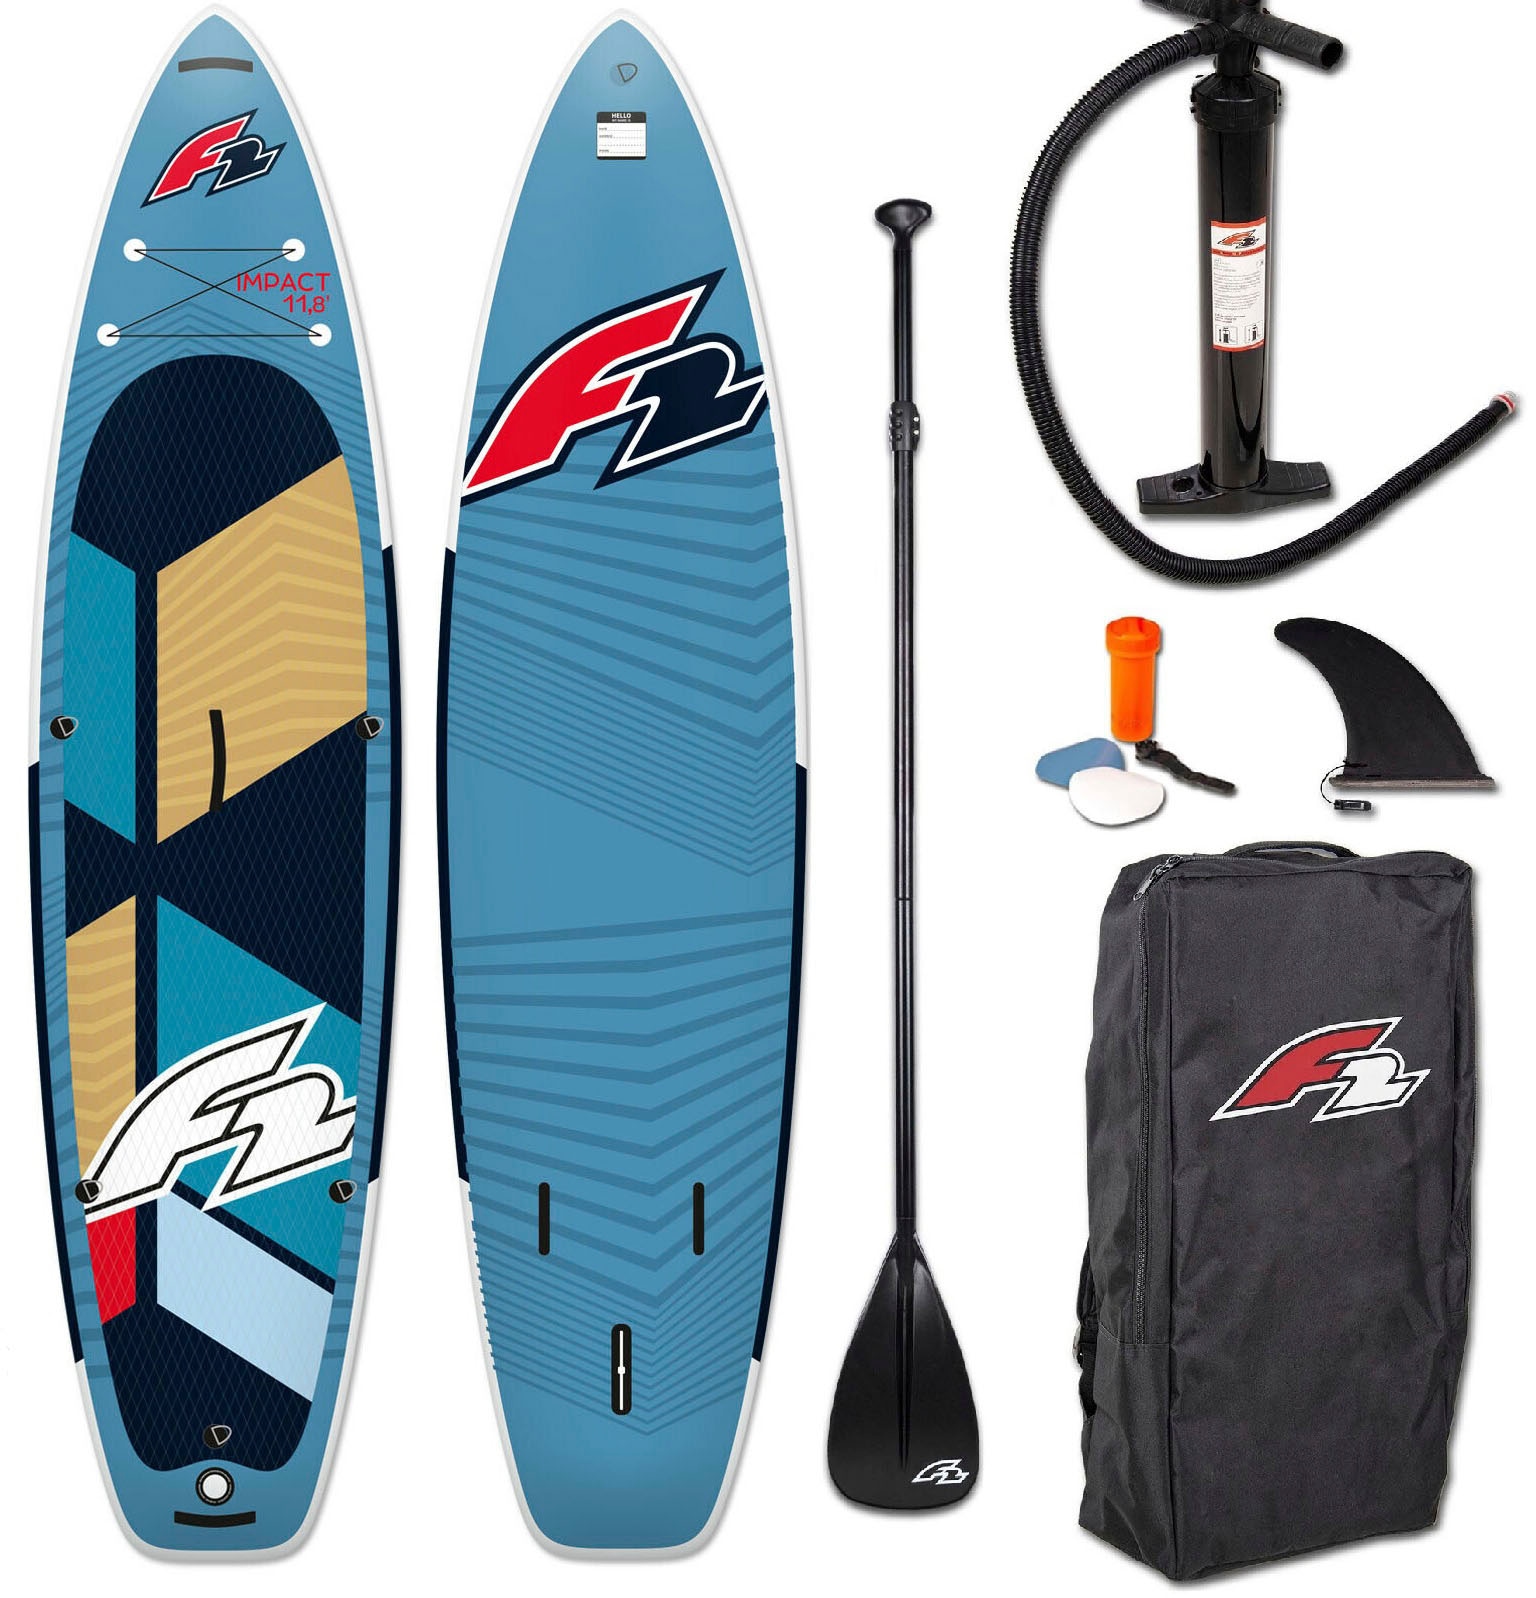 F2 Inflatable 5 OTTO Online Shop turquoise tlg.) SUP-Board »Impact 10,8«, im (Packung